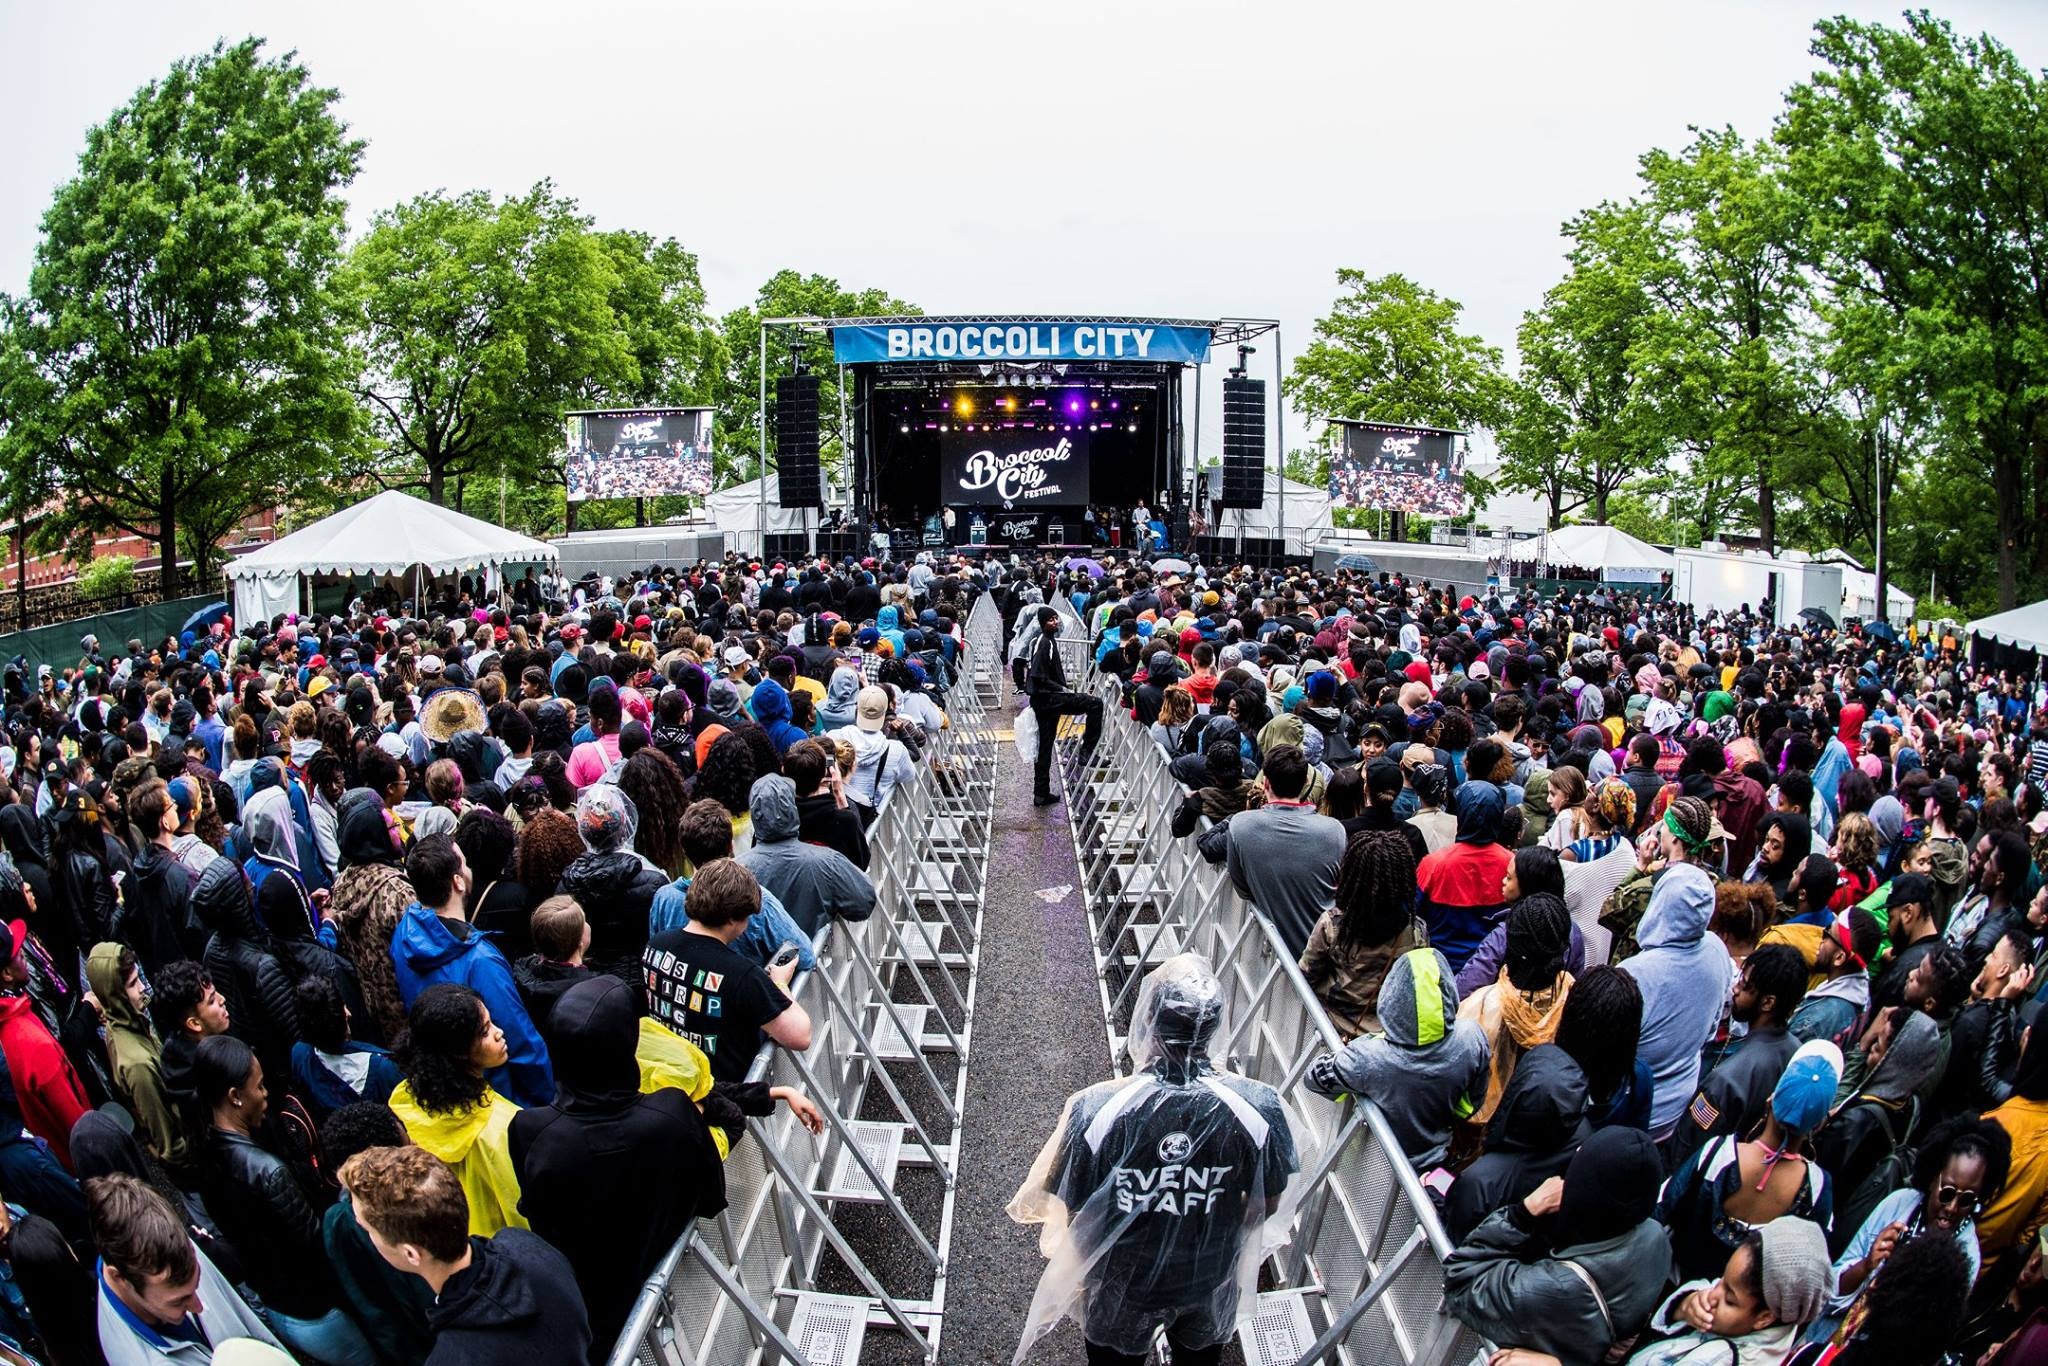 Marrying Wellness And Hip-Hop: How Brandon McEachern Transformed The Festival Scene With Broccoli City
